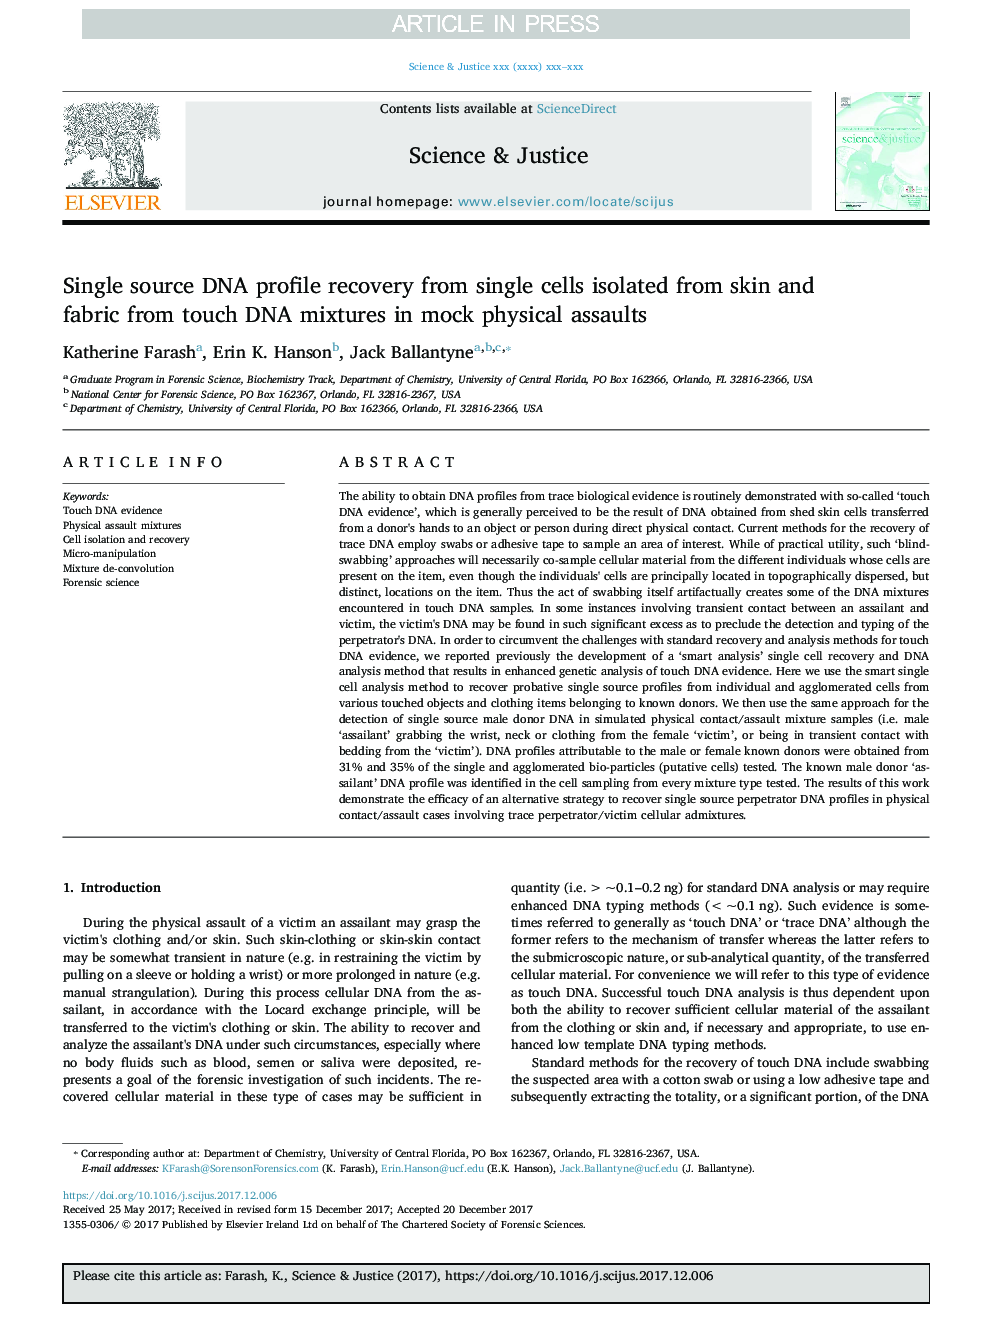 Single source DNA profile recovery from single cells isolated from skin and fabric from touch DNA mixtures in mock physical assaults